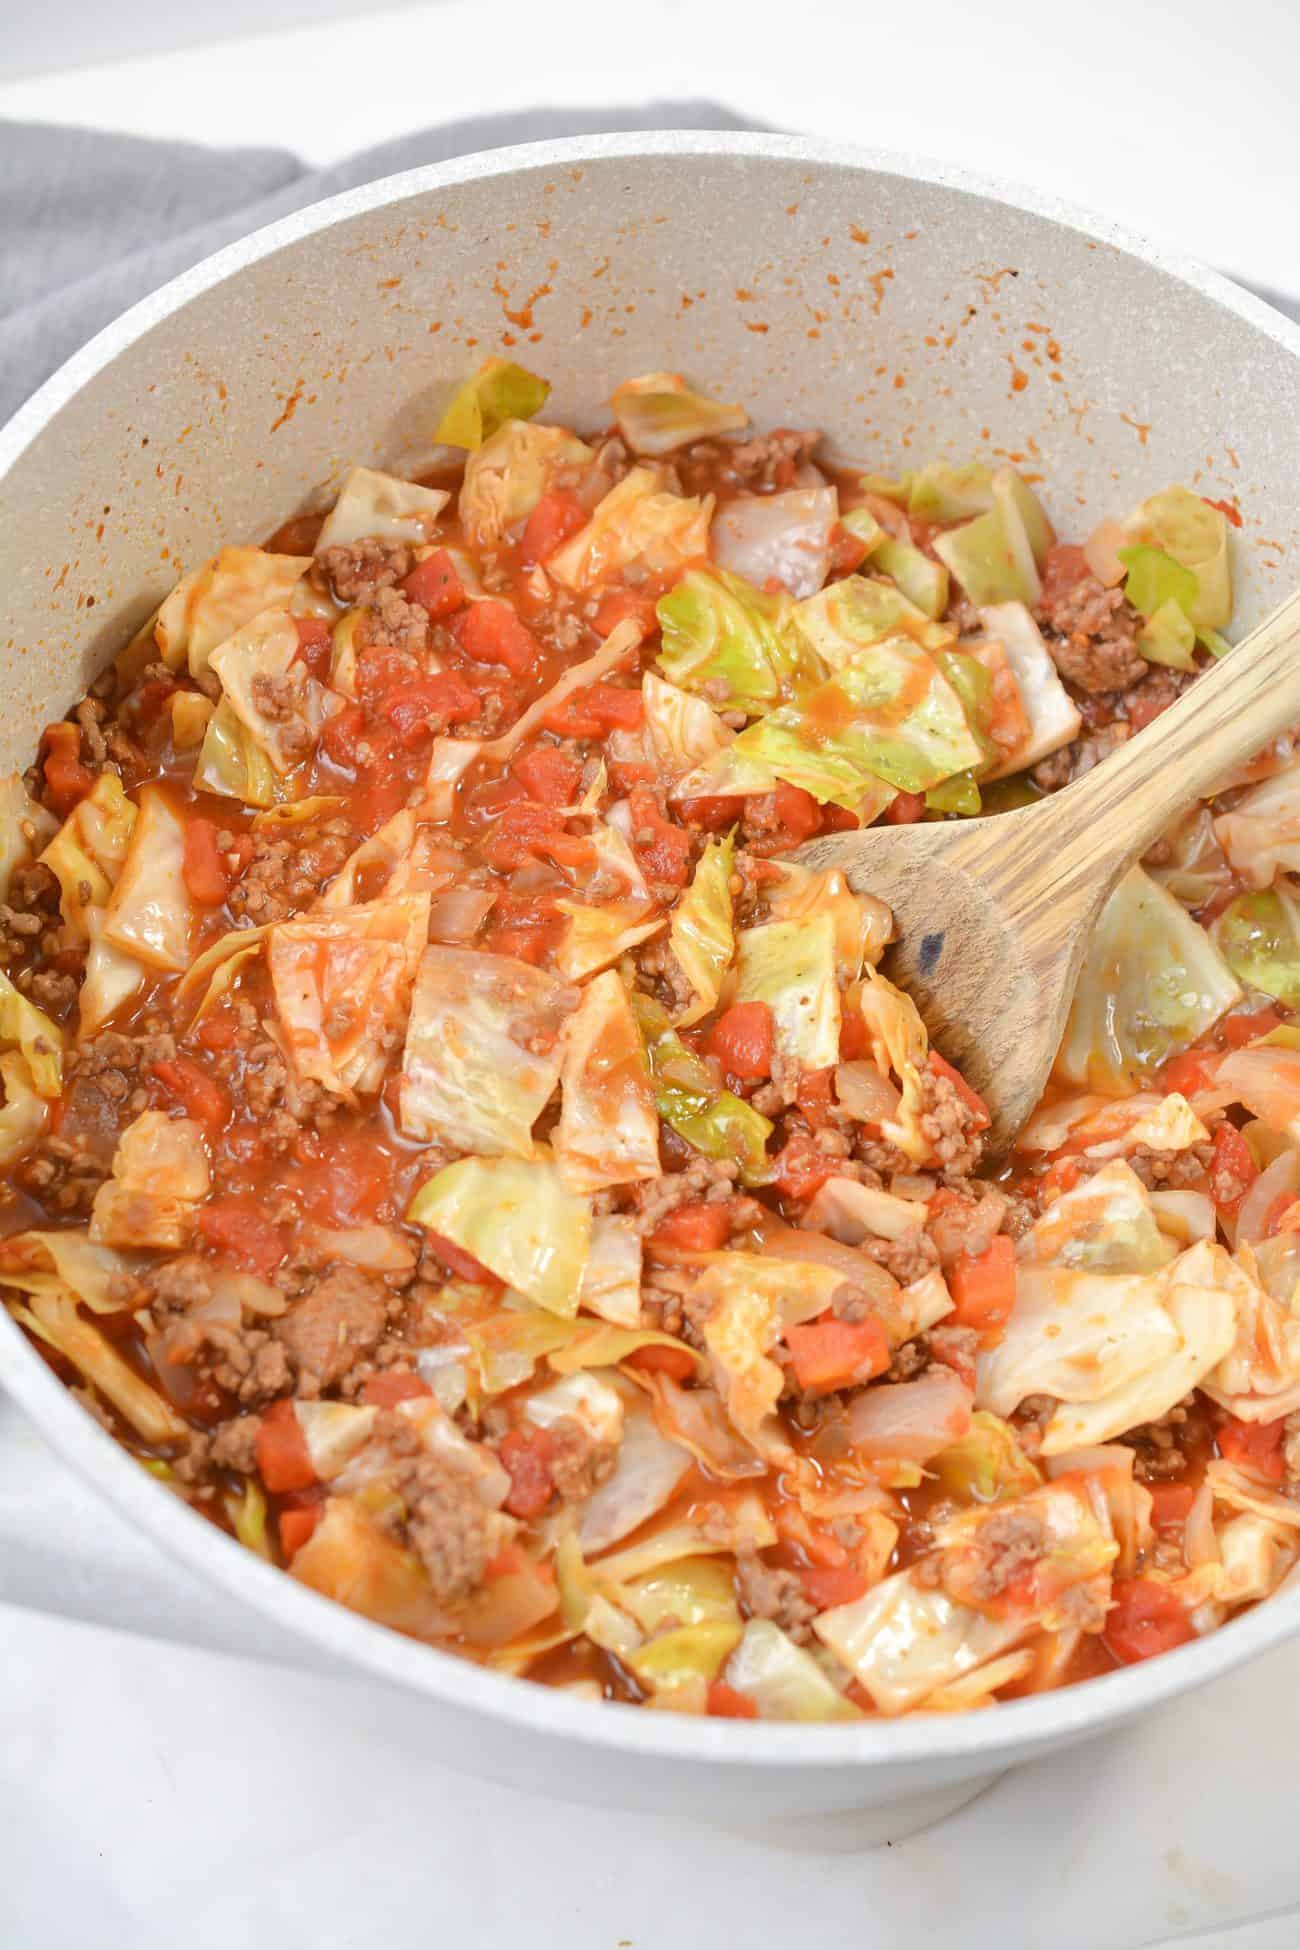 ground beef and cabbage, cabbage and ground beef, beef and cabbage